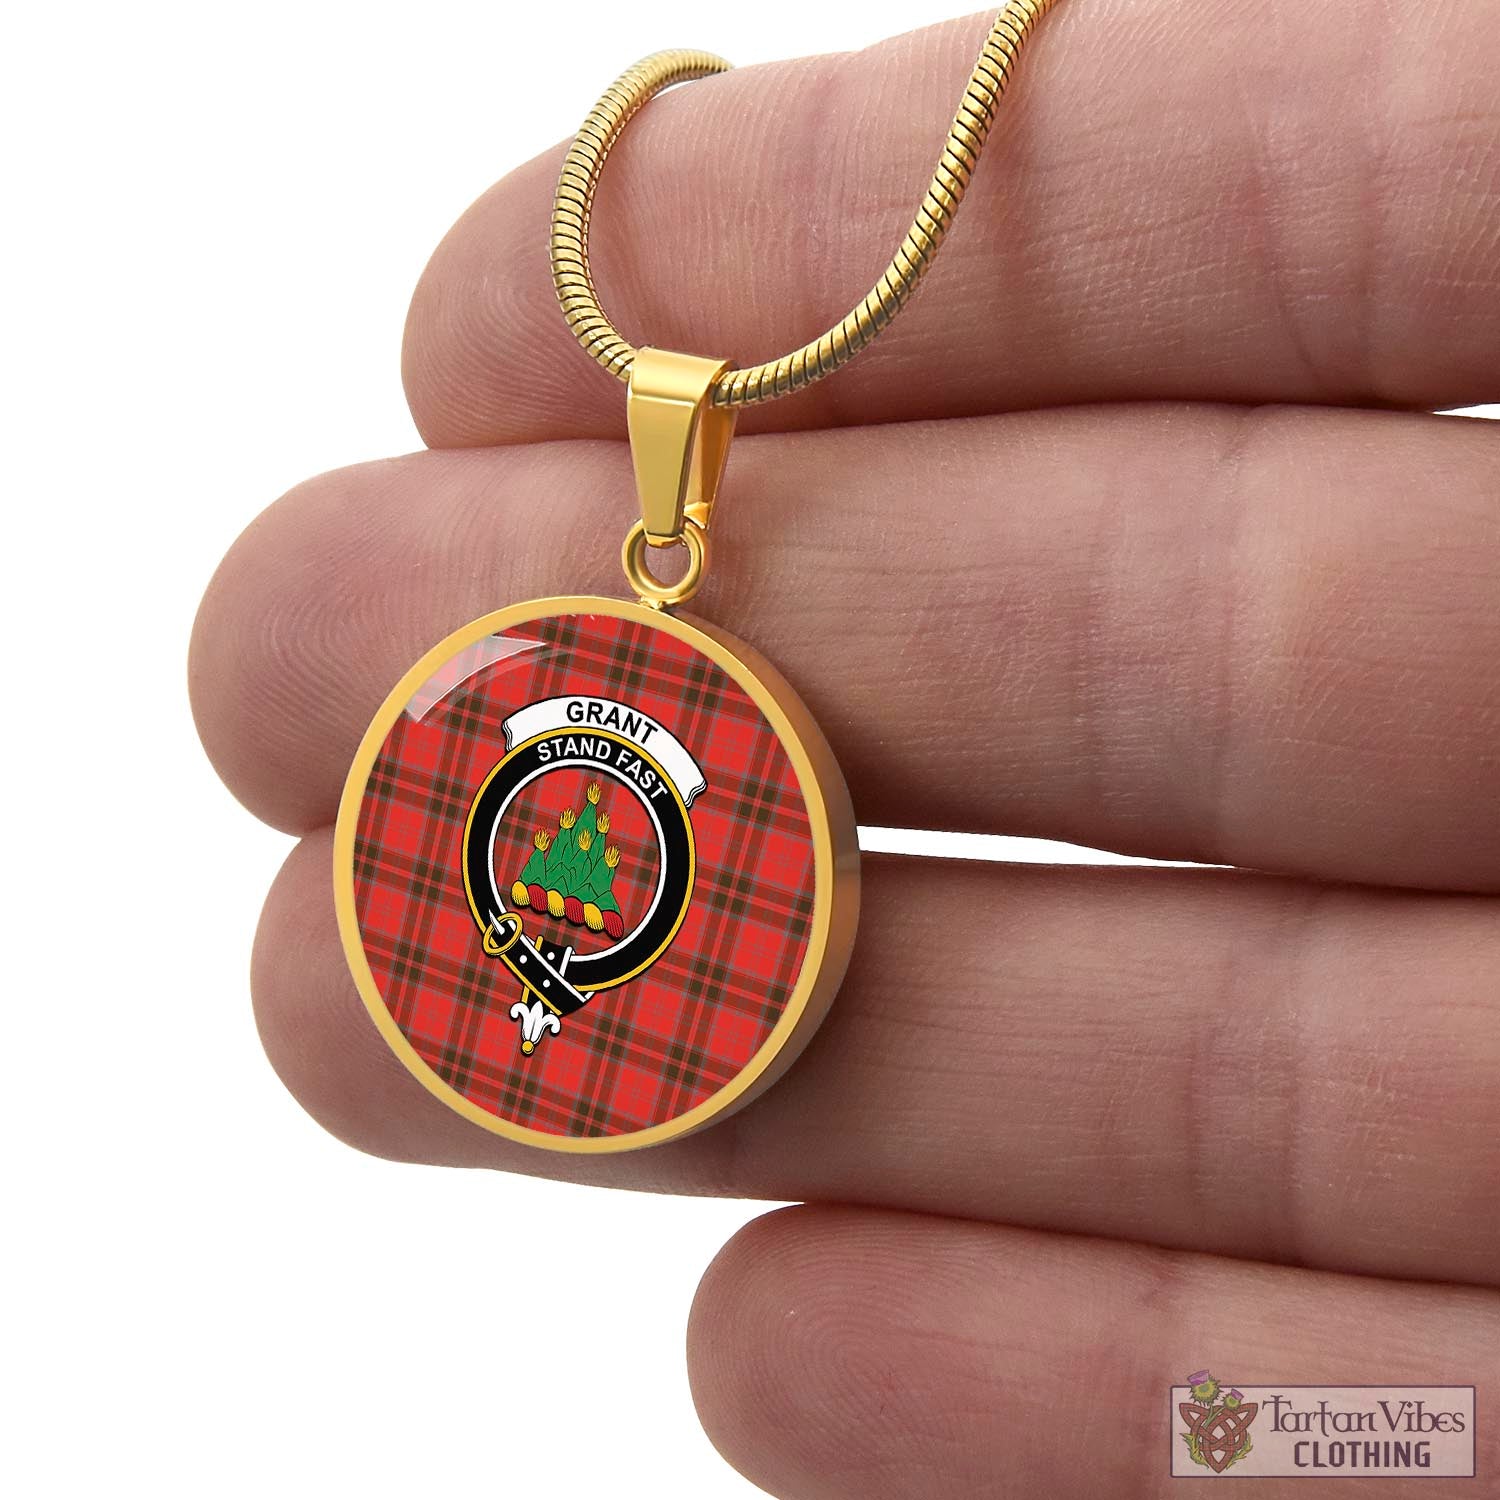 Tartan Vibes Clothing Grant Weathered Tartan Circle Necklace with Family Crest